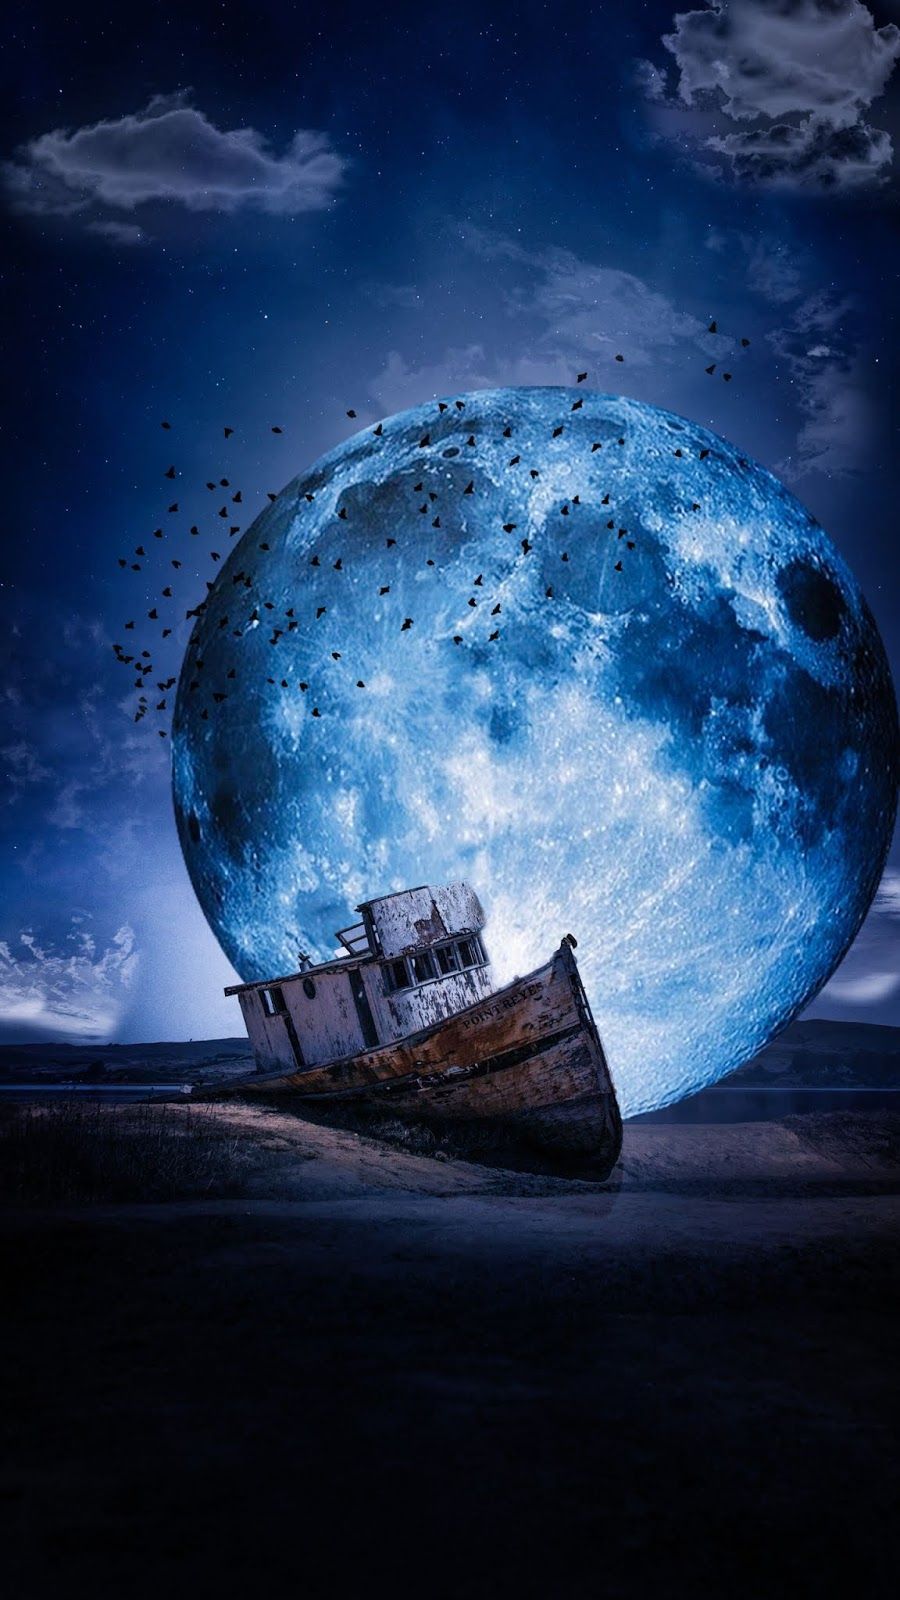 Catching the moon. Fantasy landscape, Planets wallpaper